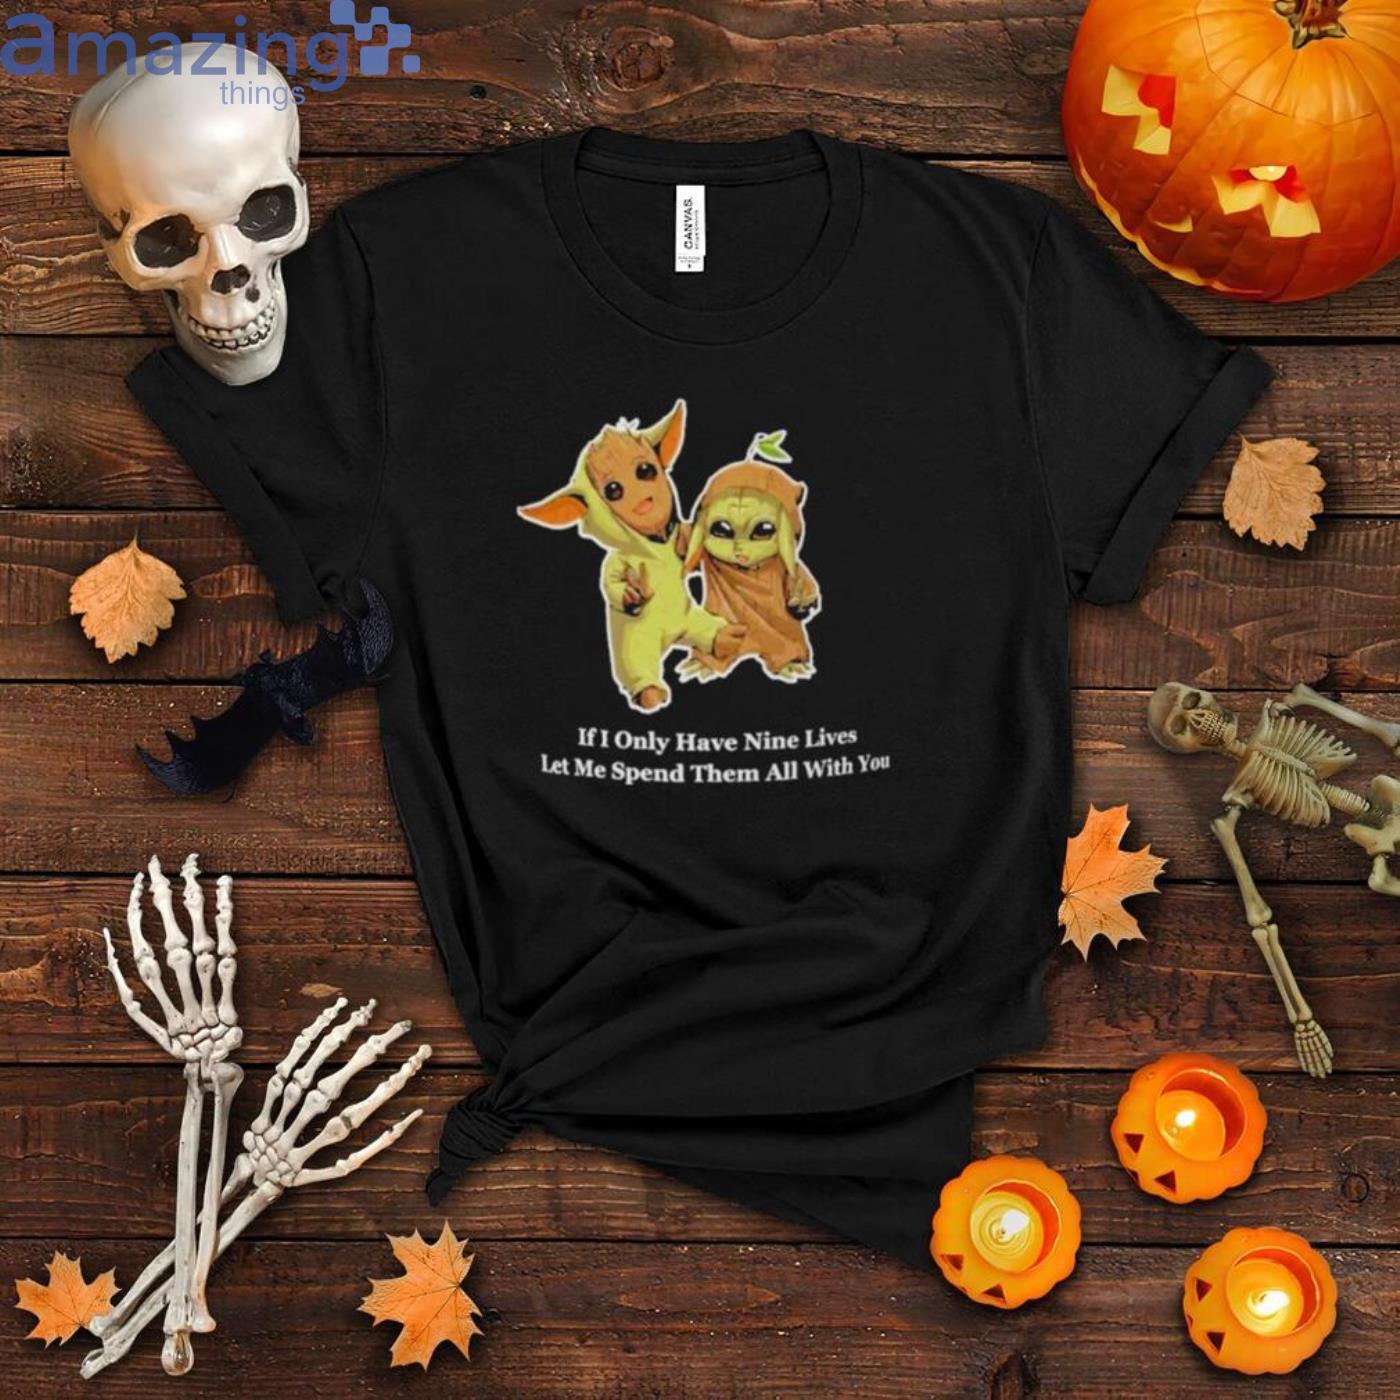 Baby Groot And Baby Yoda If I Only Have Nine Lives Let Me Spend Them All With You Shirt Product Photo 1